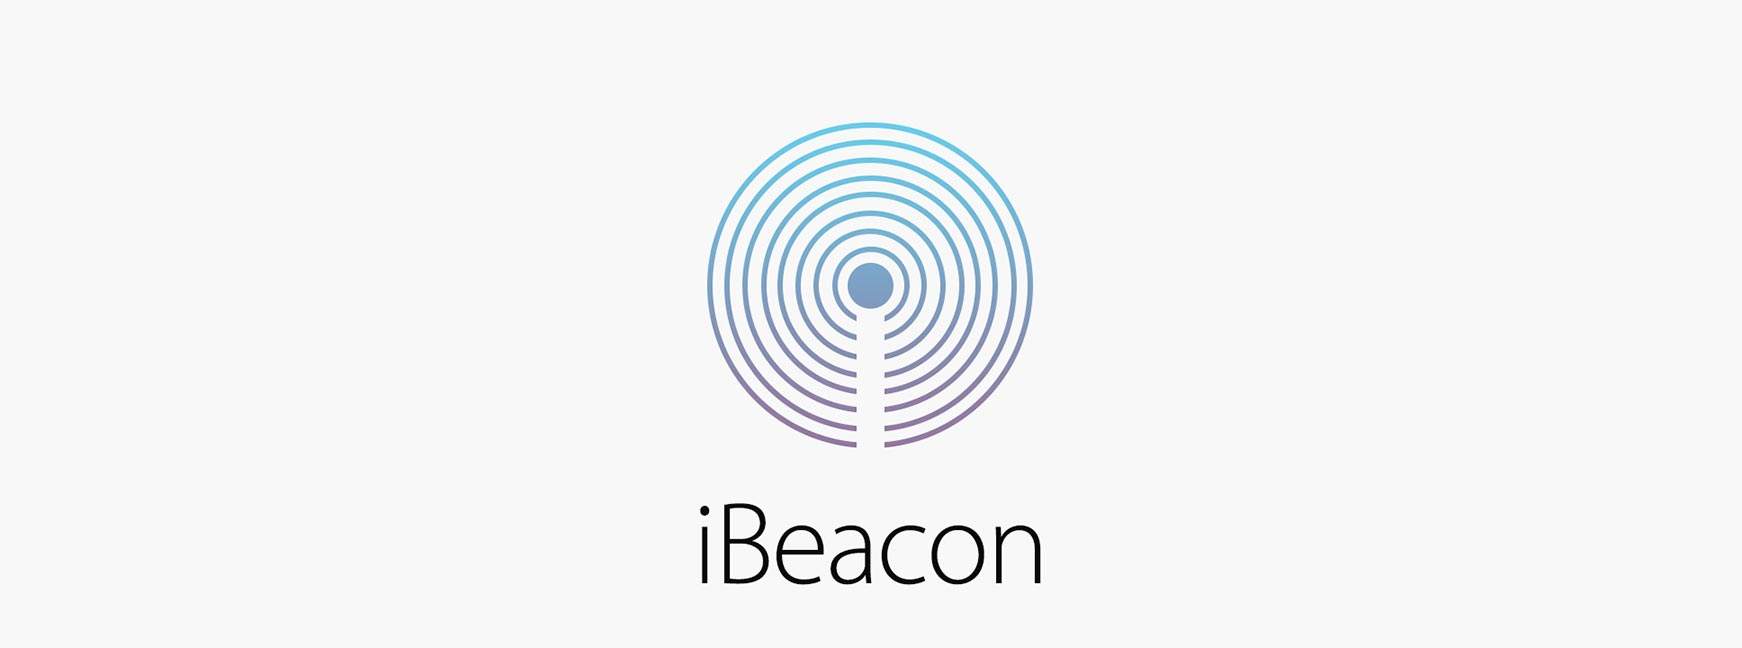 A Guide to Developing with iBeacon for Bluetooth Beacons